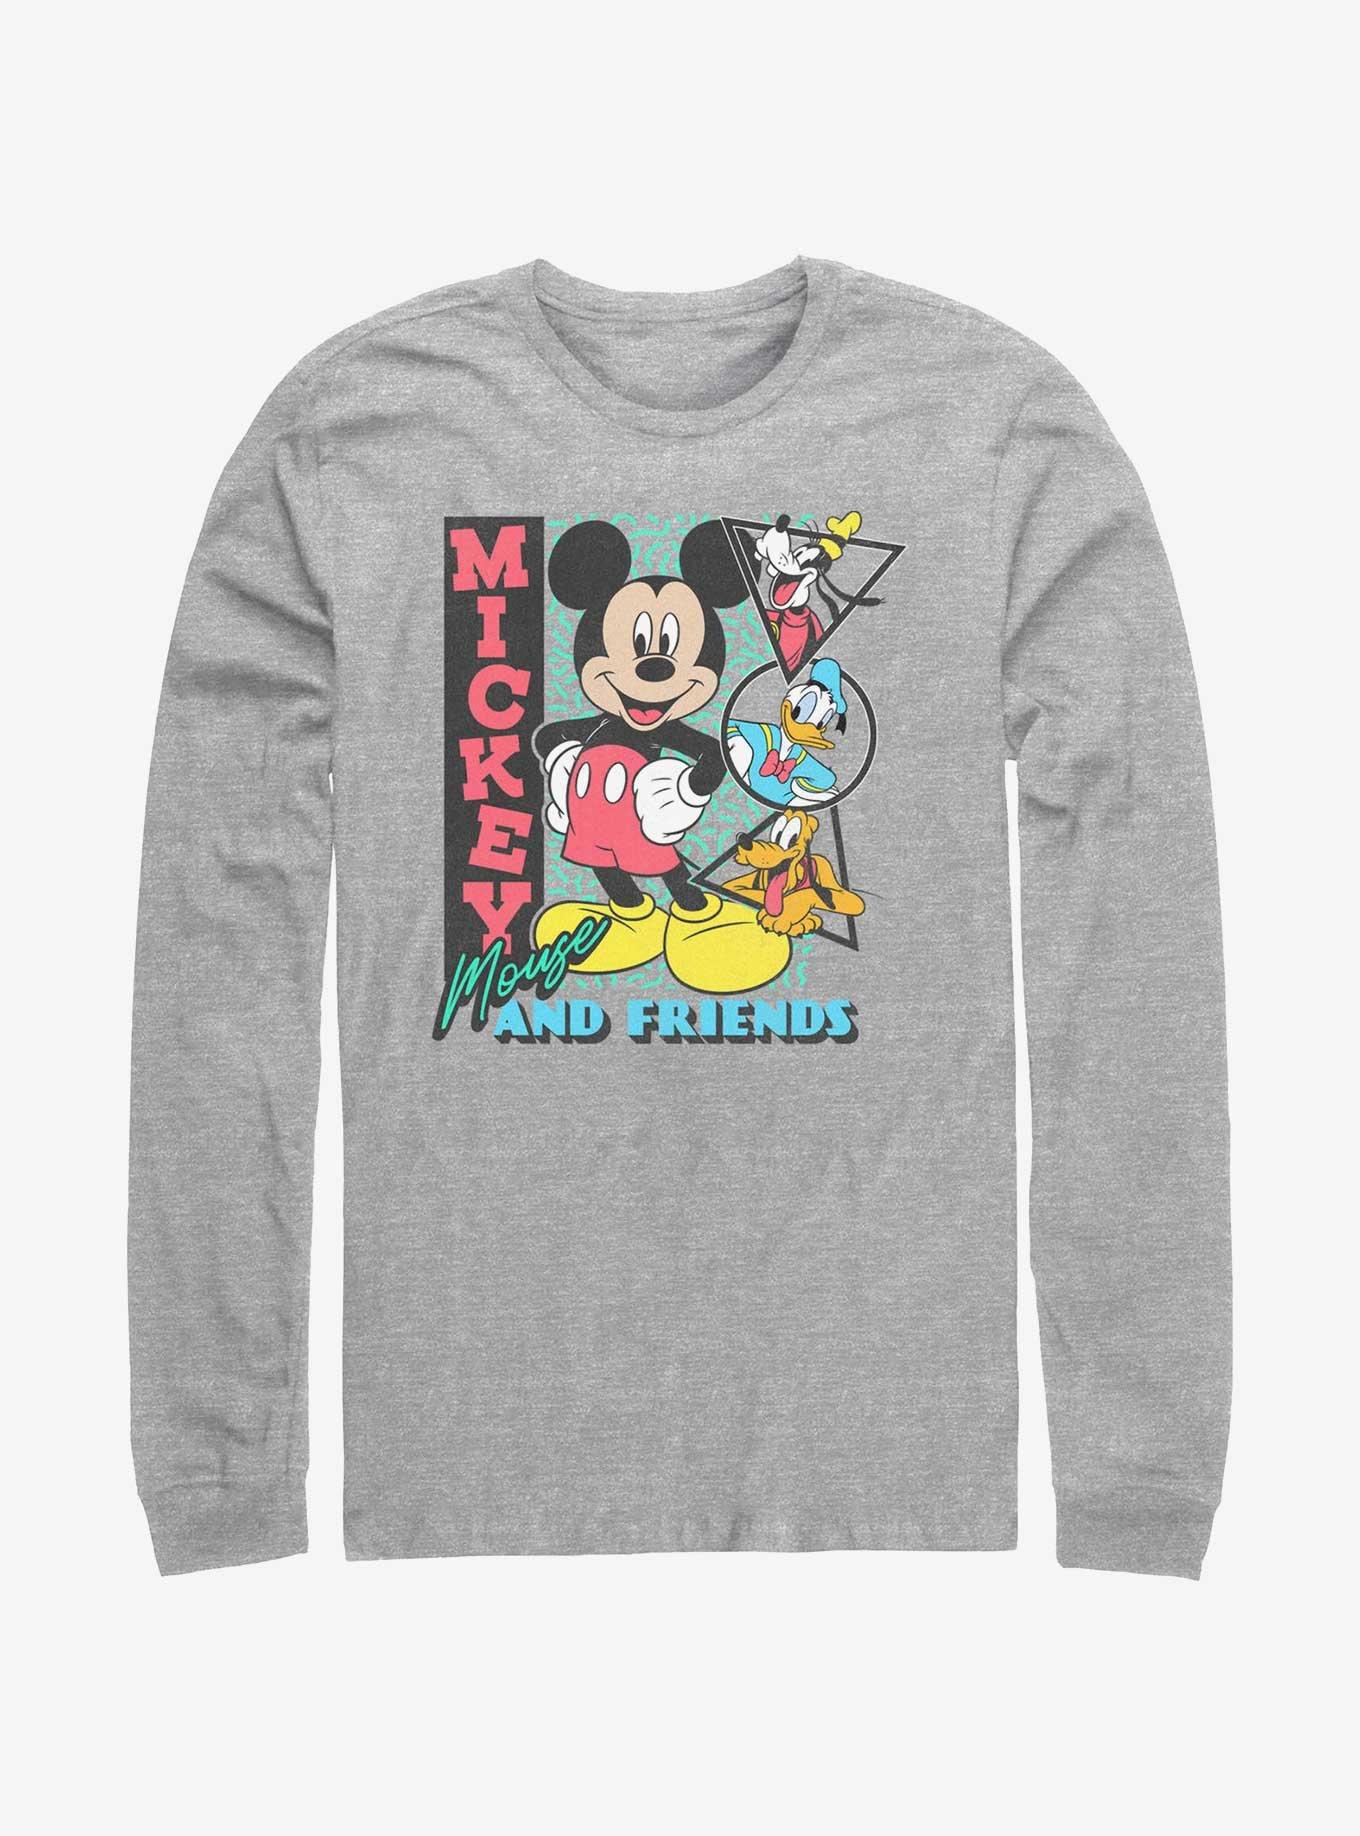 Disney Mickey Mouse Friends Goofy Donald and Pluto Long-Sleeve T-Shirt, ATH HTR, hi-res